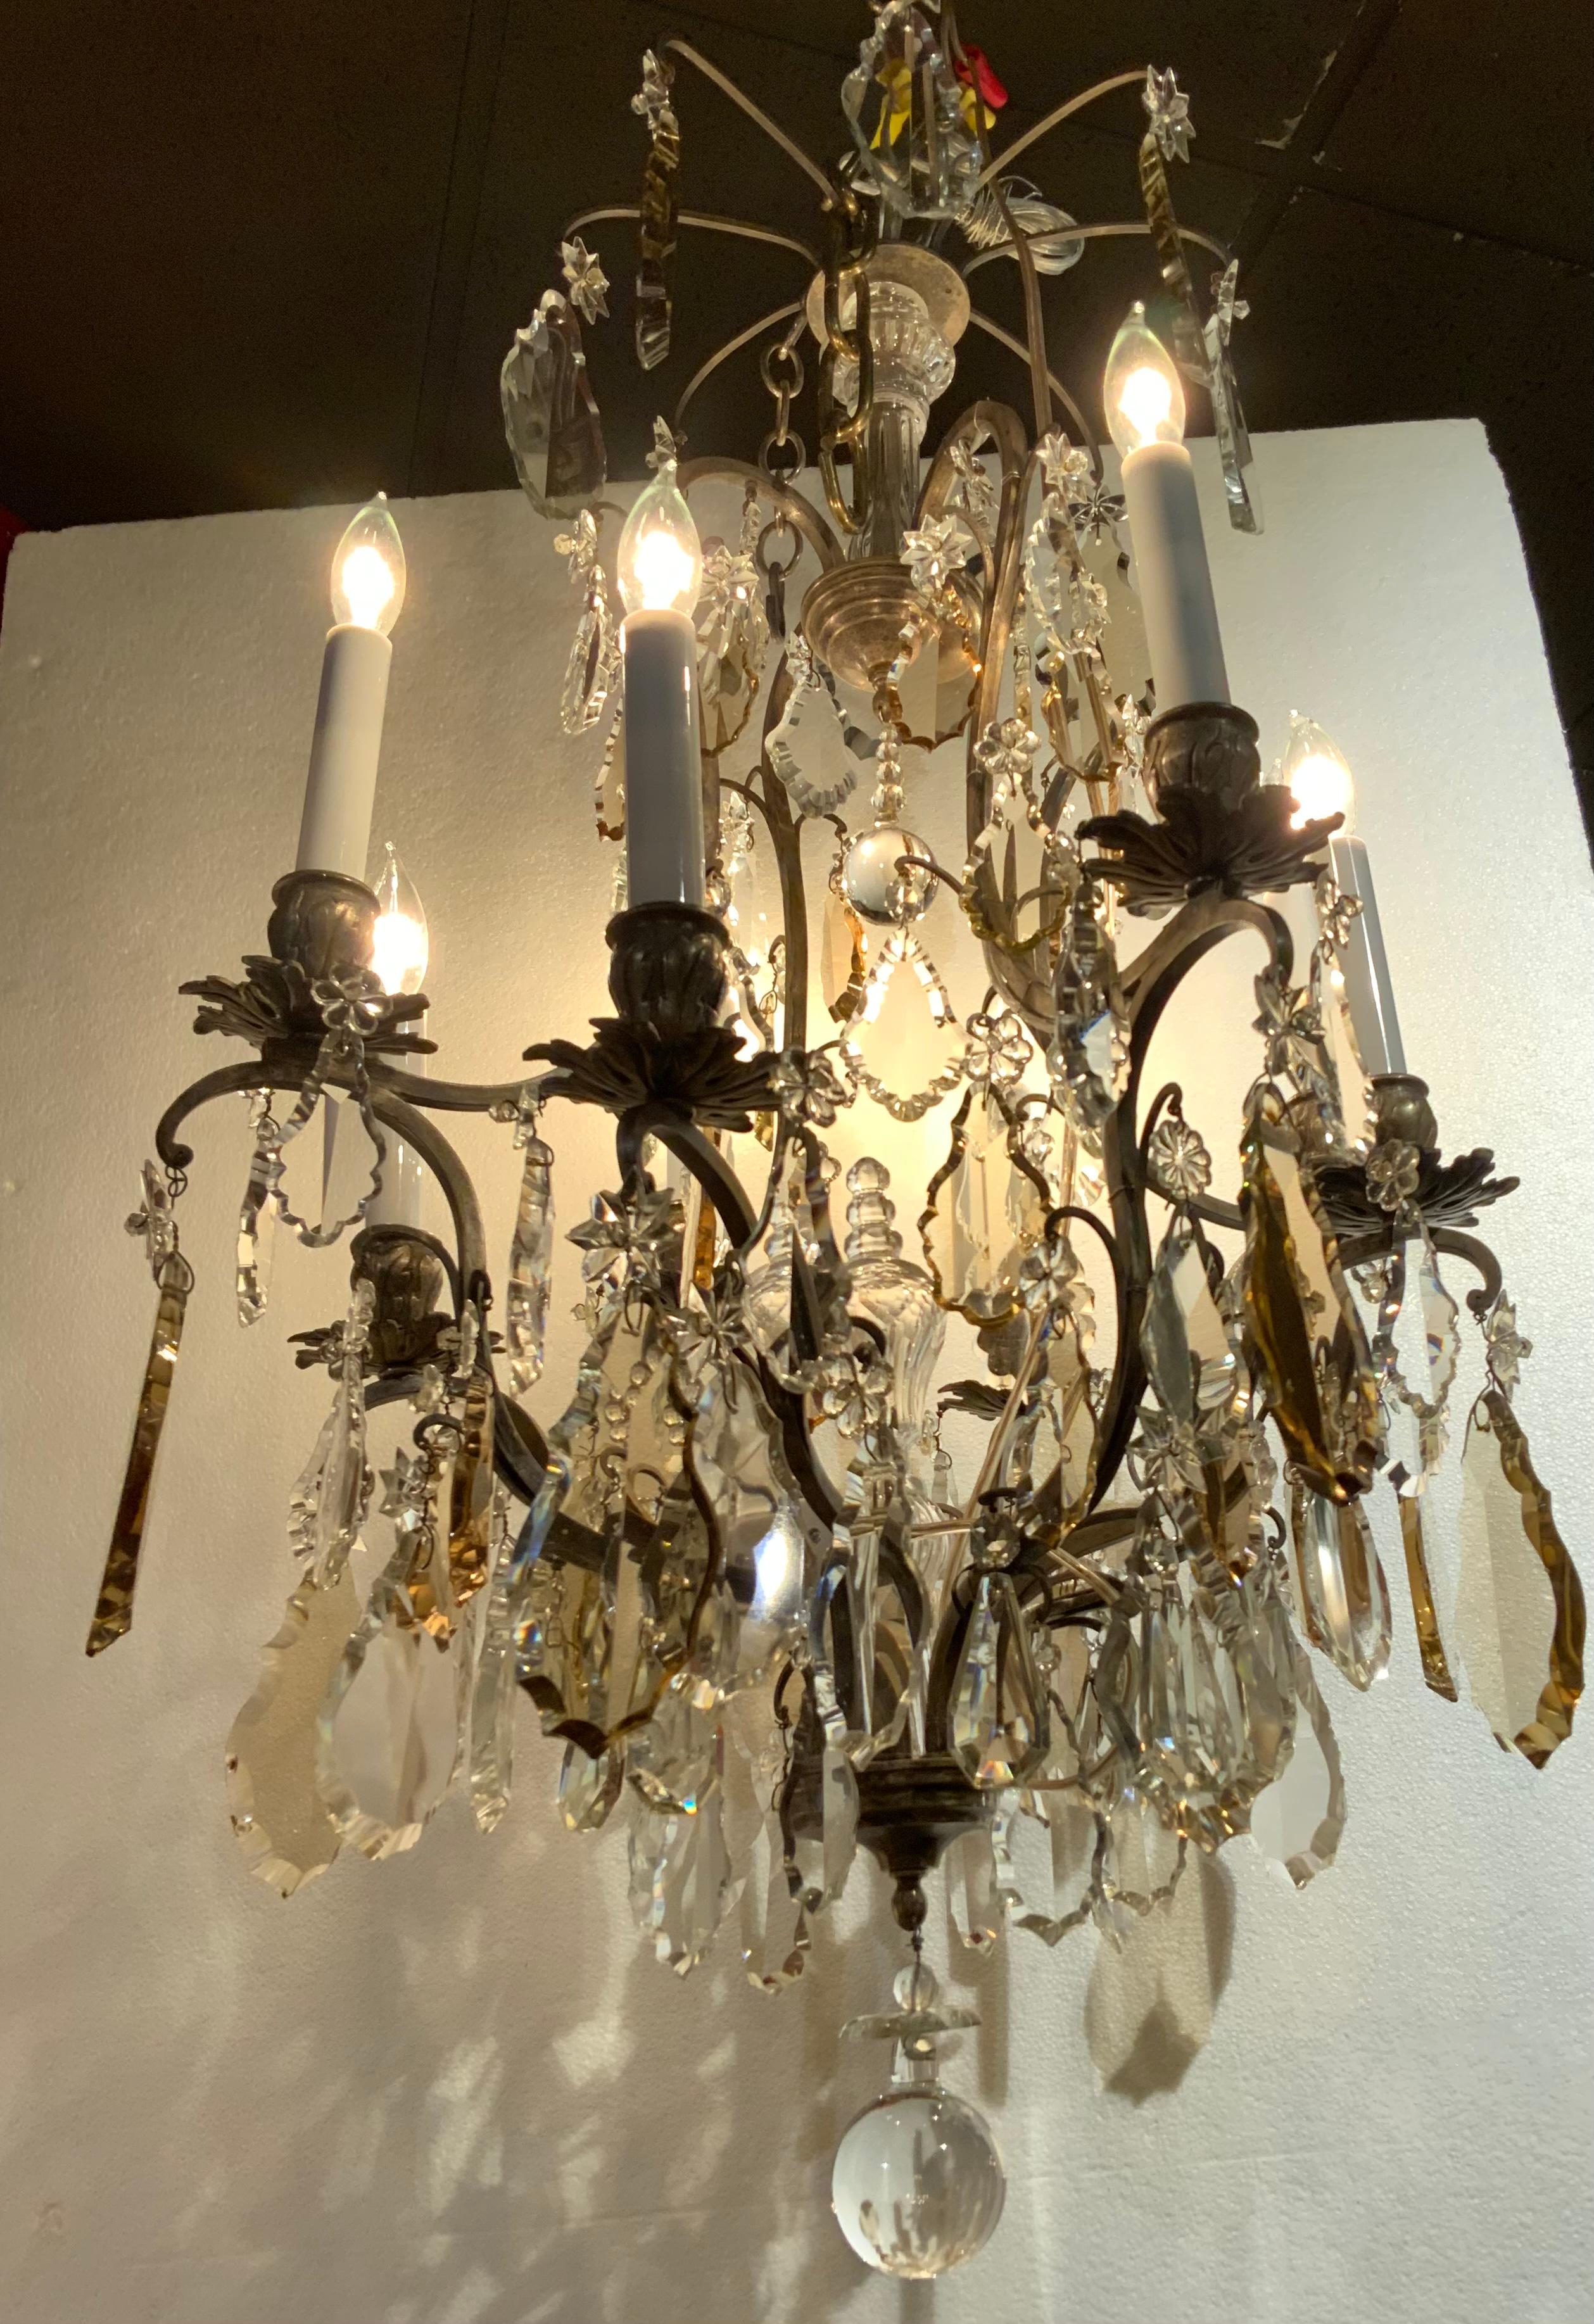 Fine French bronze and crystal chandelier in the Louis
XIV taste, the eight light chandelier with bronze argente
Frame, the central standard clad with molded glass, the scrolled
Candle arms terminating in leaf-molded candle cups and
Drip pans,